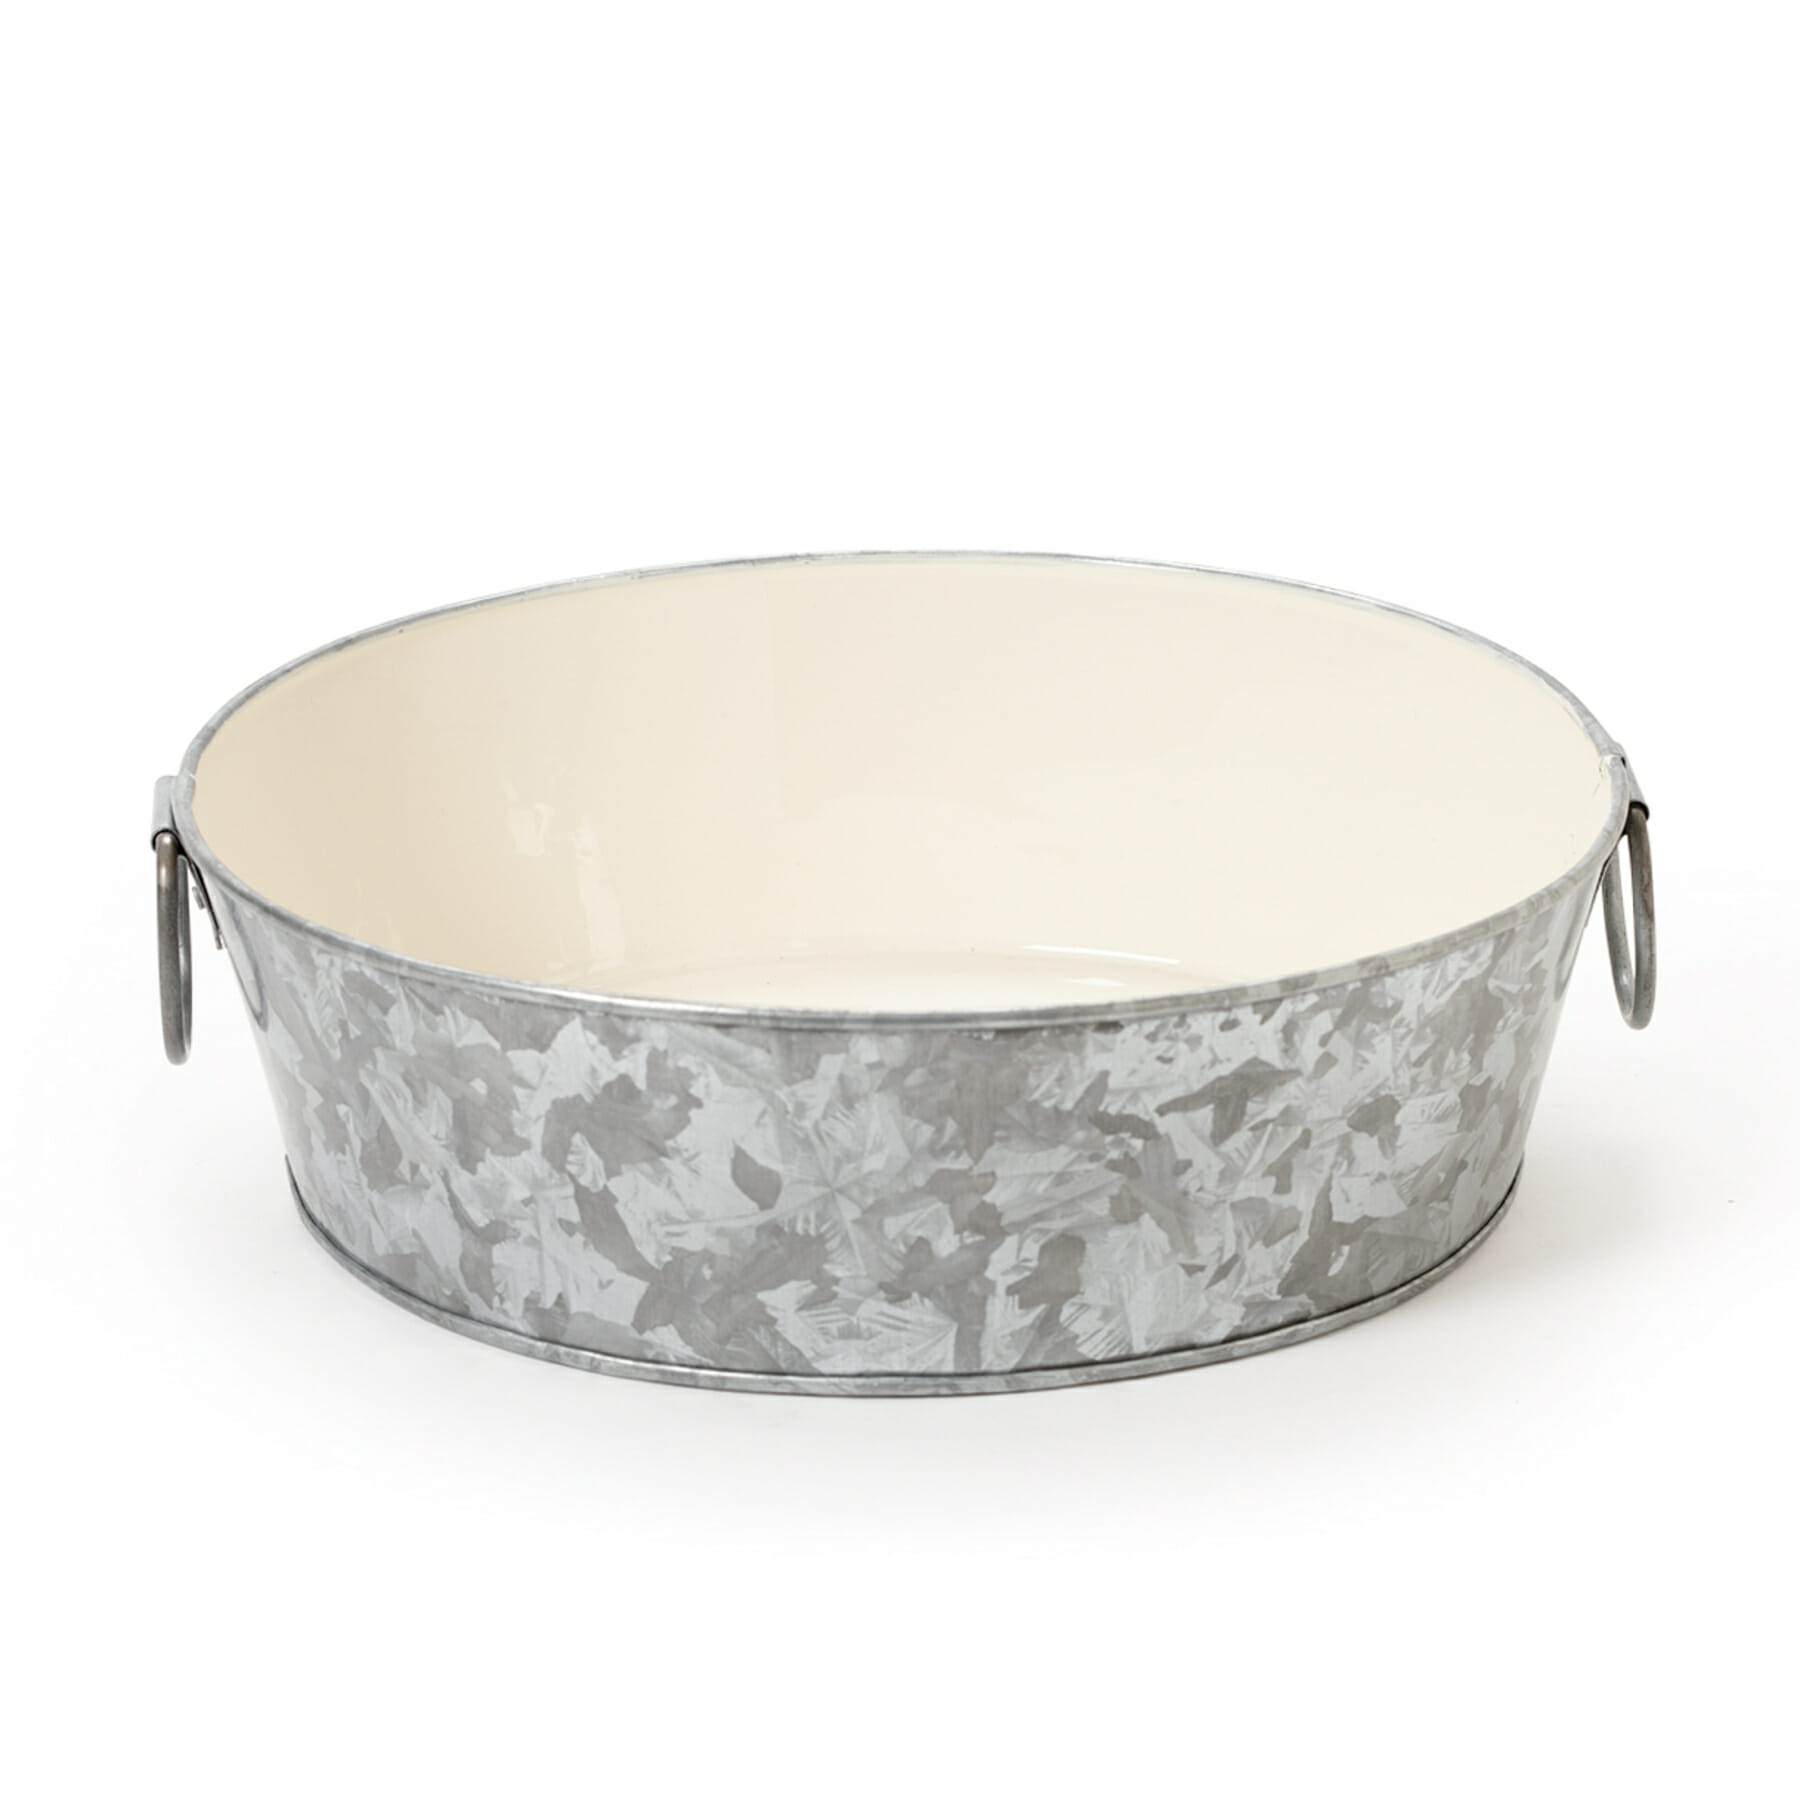 9" Dia. Round Galvanized Tray with Ivory Powder Coated Interior (12.5" with Handles), 3" deep